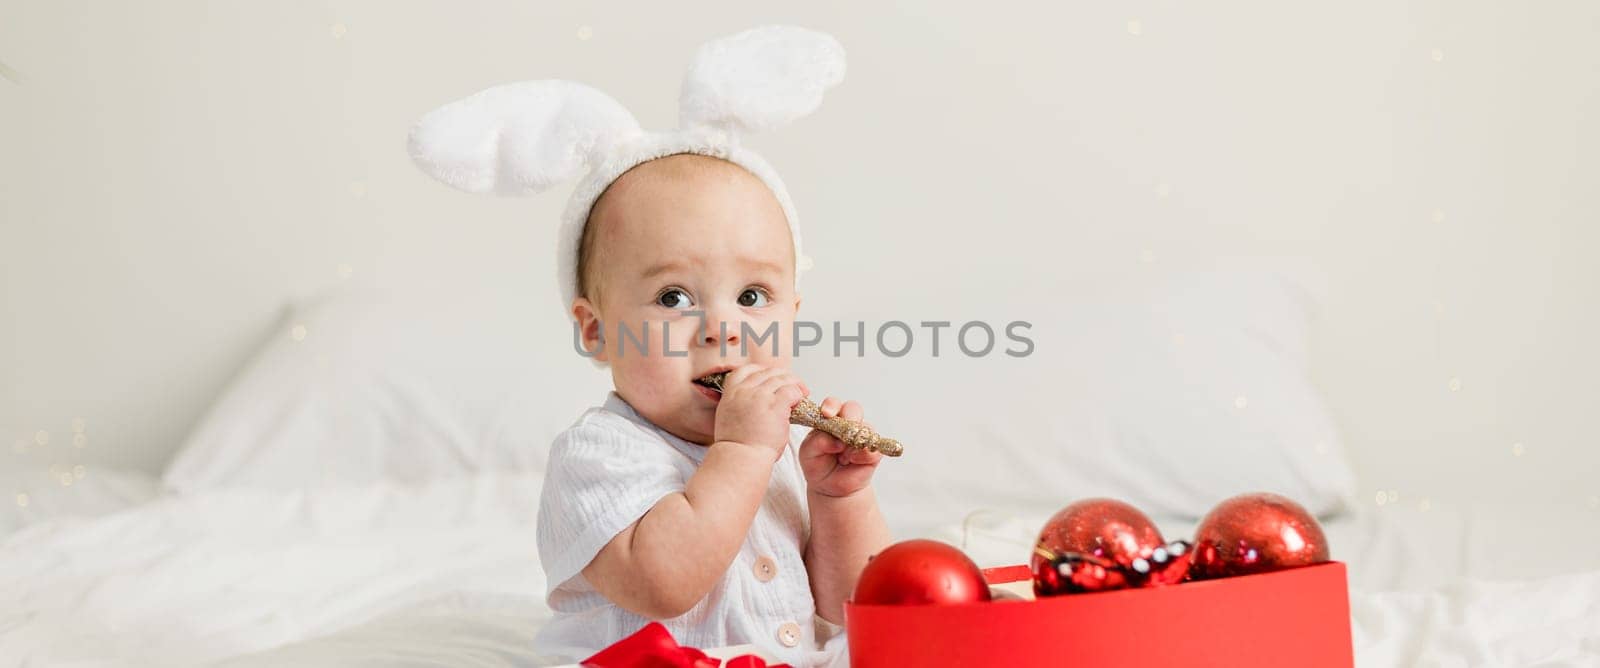 Christmas Baby in Santa Hat Child playing with baubles. Present Gift Box over Holiday Lights background and Merry Christmas